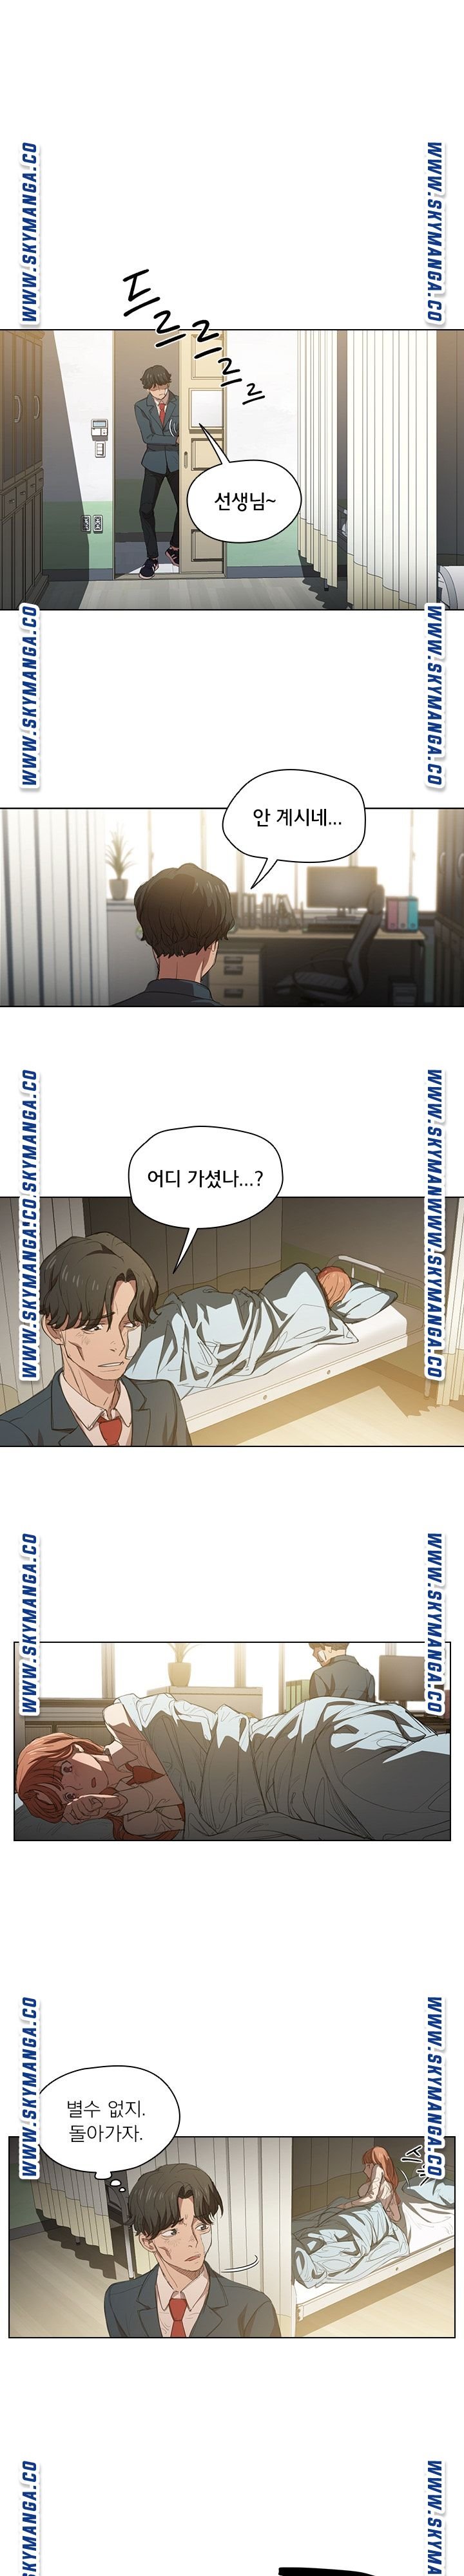 how-about-getting-lost-raw-chap-2-14